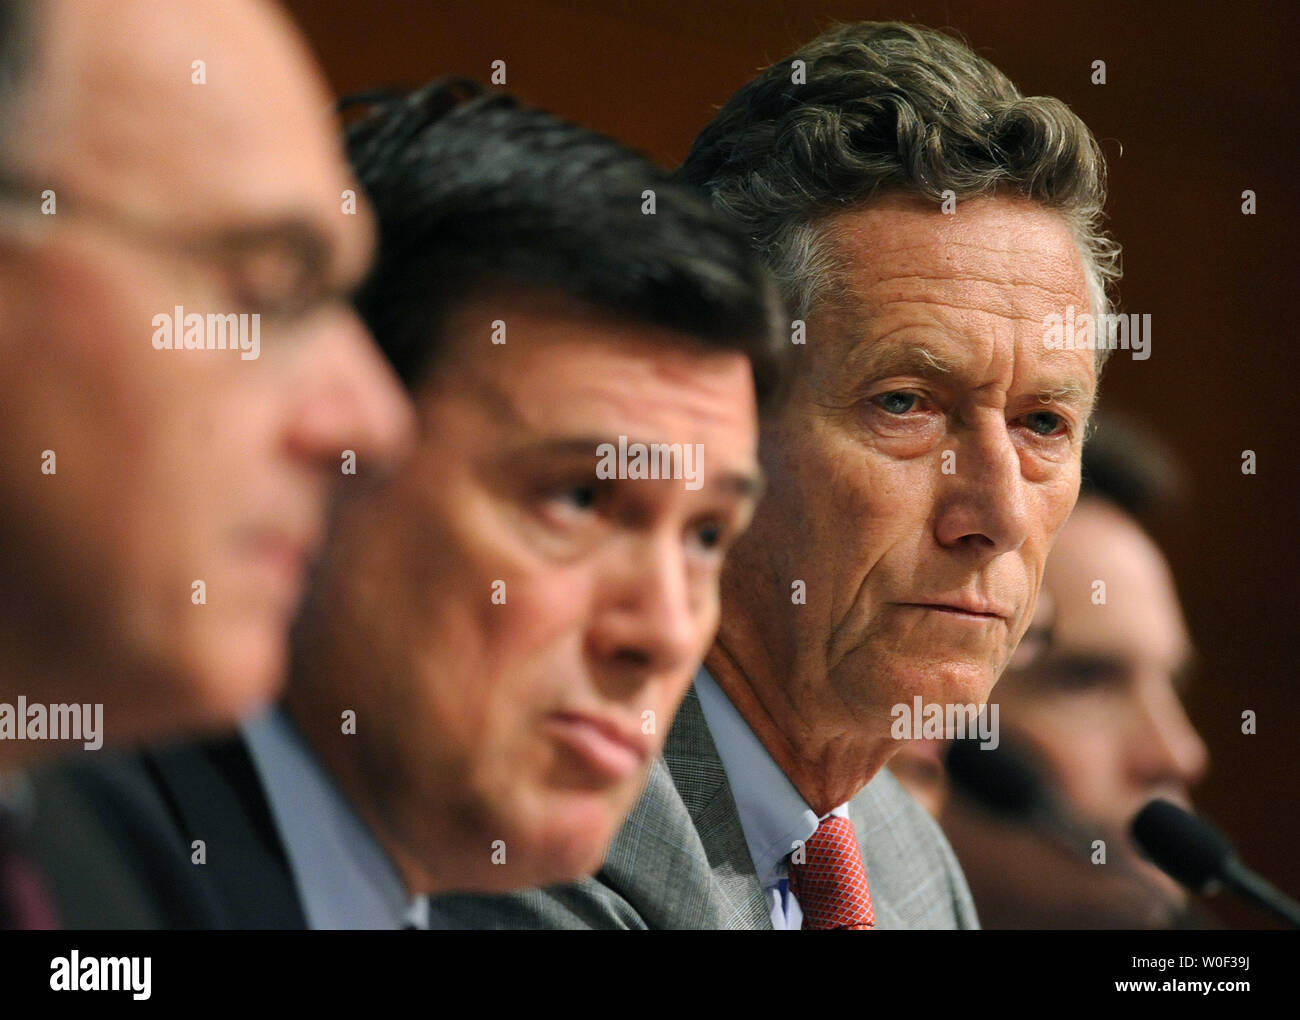 Olivier Blanchard (2nd-R), Economic Counselor and Director of the Research Department at the International Monetary Fund (IMF), participate in a press conference on the world economic outlook at the IMF Headquarters in Washington on July 8, 2009. (UPI Photo/Kevin Dietsch) Stock Photo